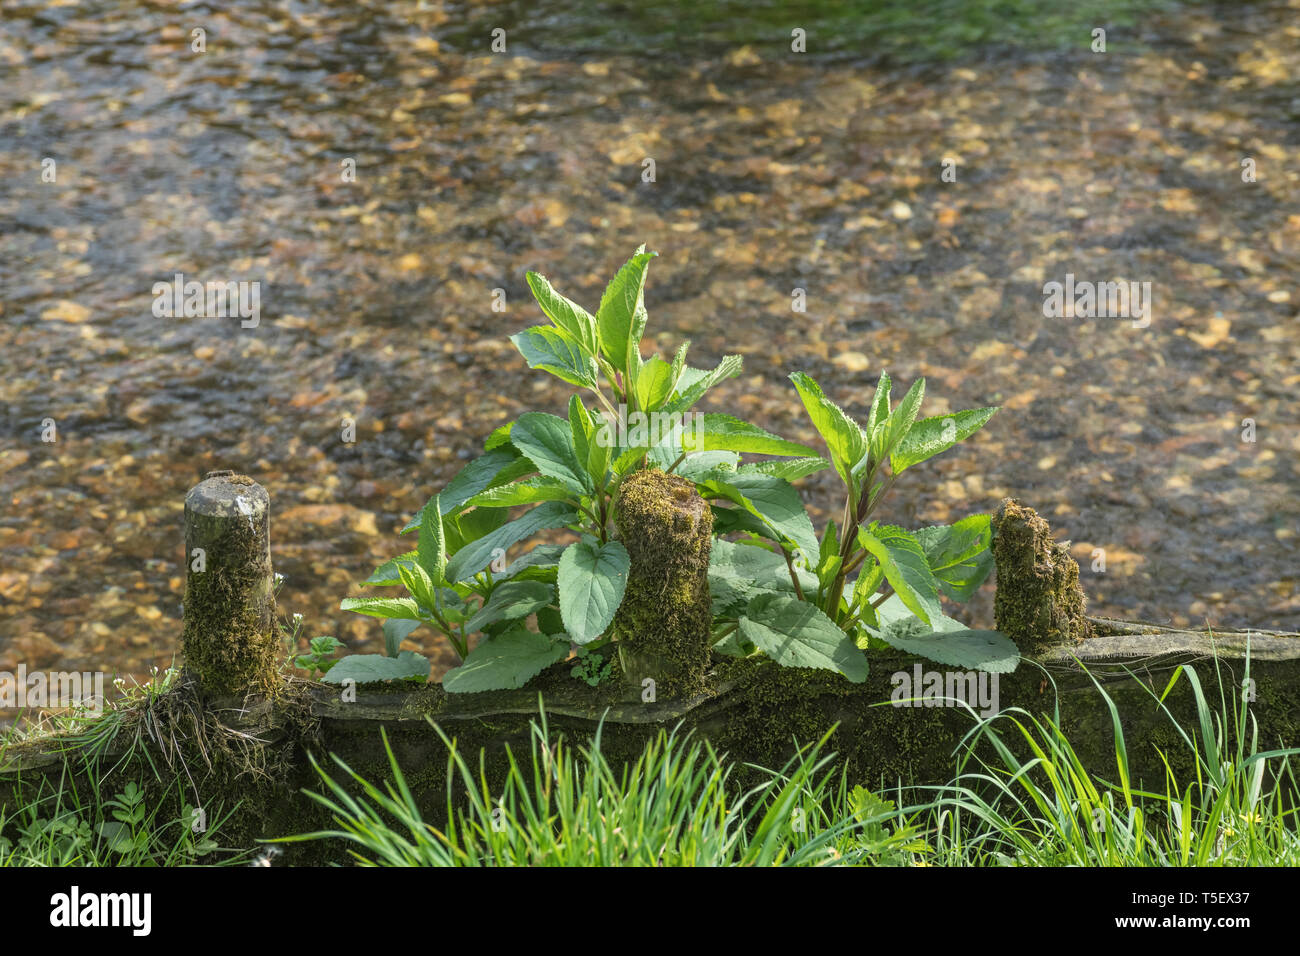 Pre-flowering Water Figwort / Scrophulria aquatica growing from the side of a wooden flood defence barrier. Metaphor flood prone. Medicinal plant. Stock Photo